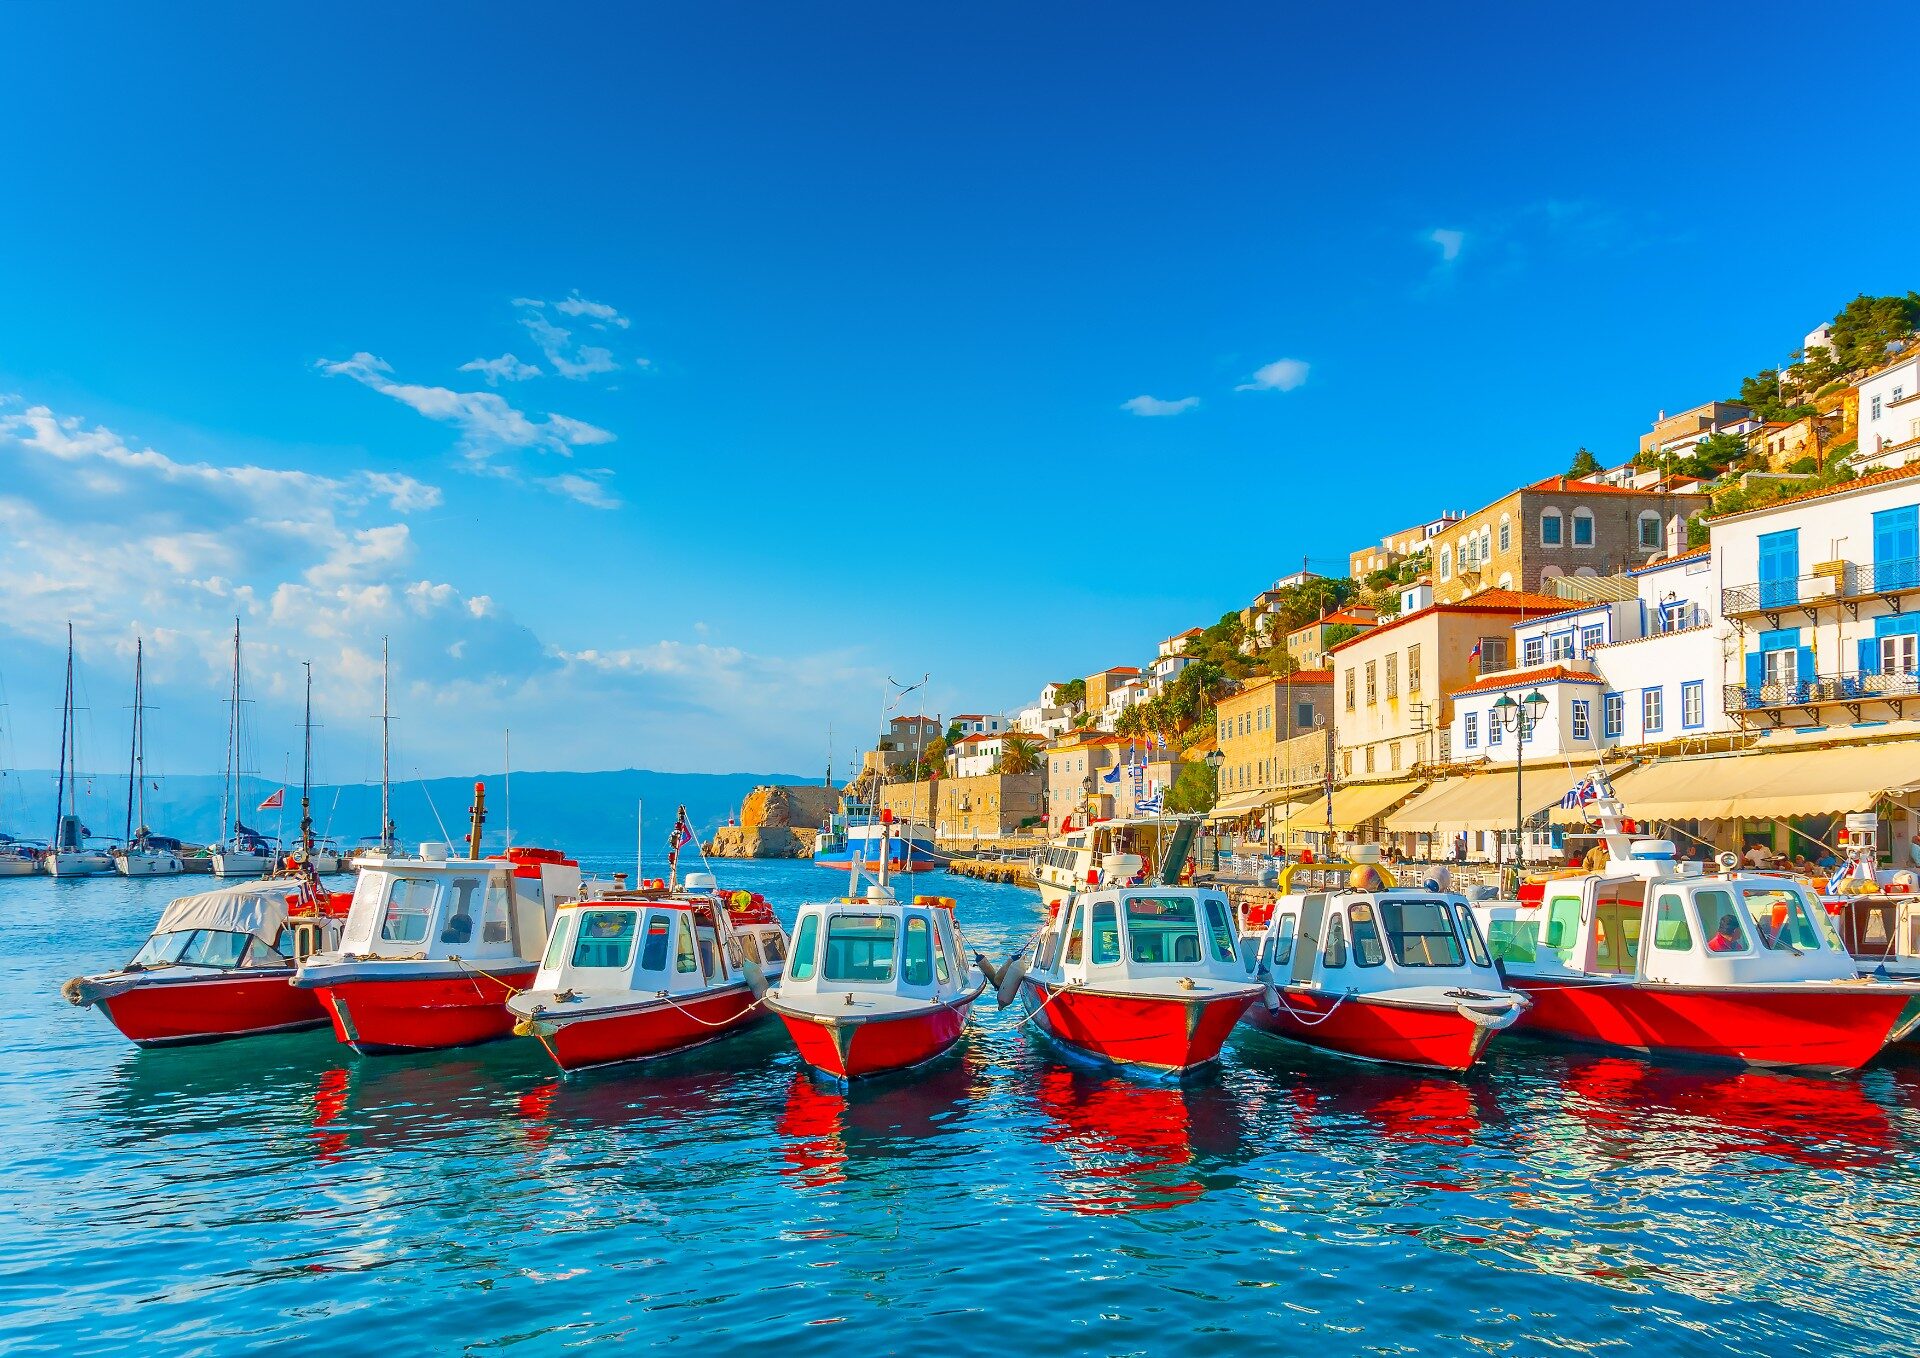 most-beautiful-places-in-greece-hydra-town-hydra-view.jpg